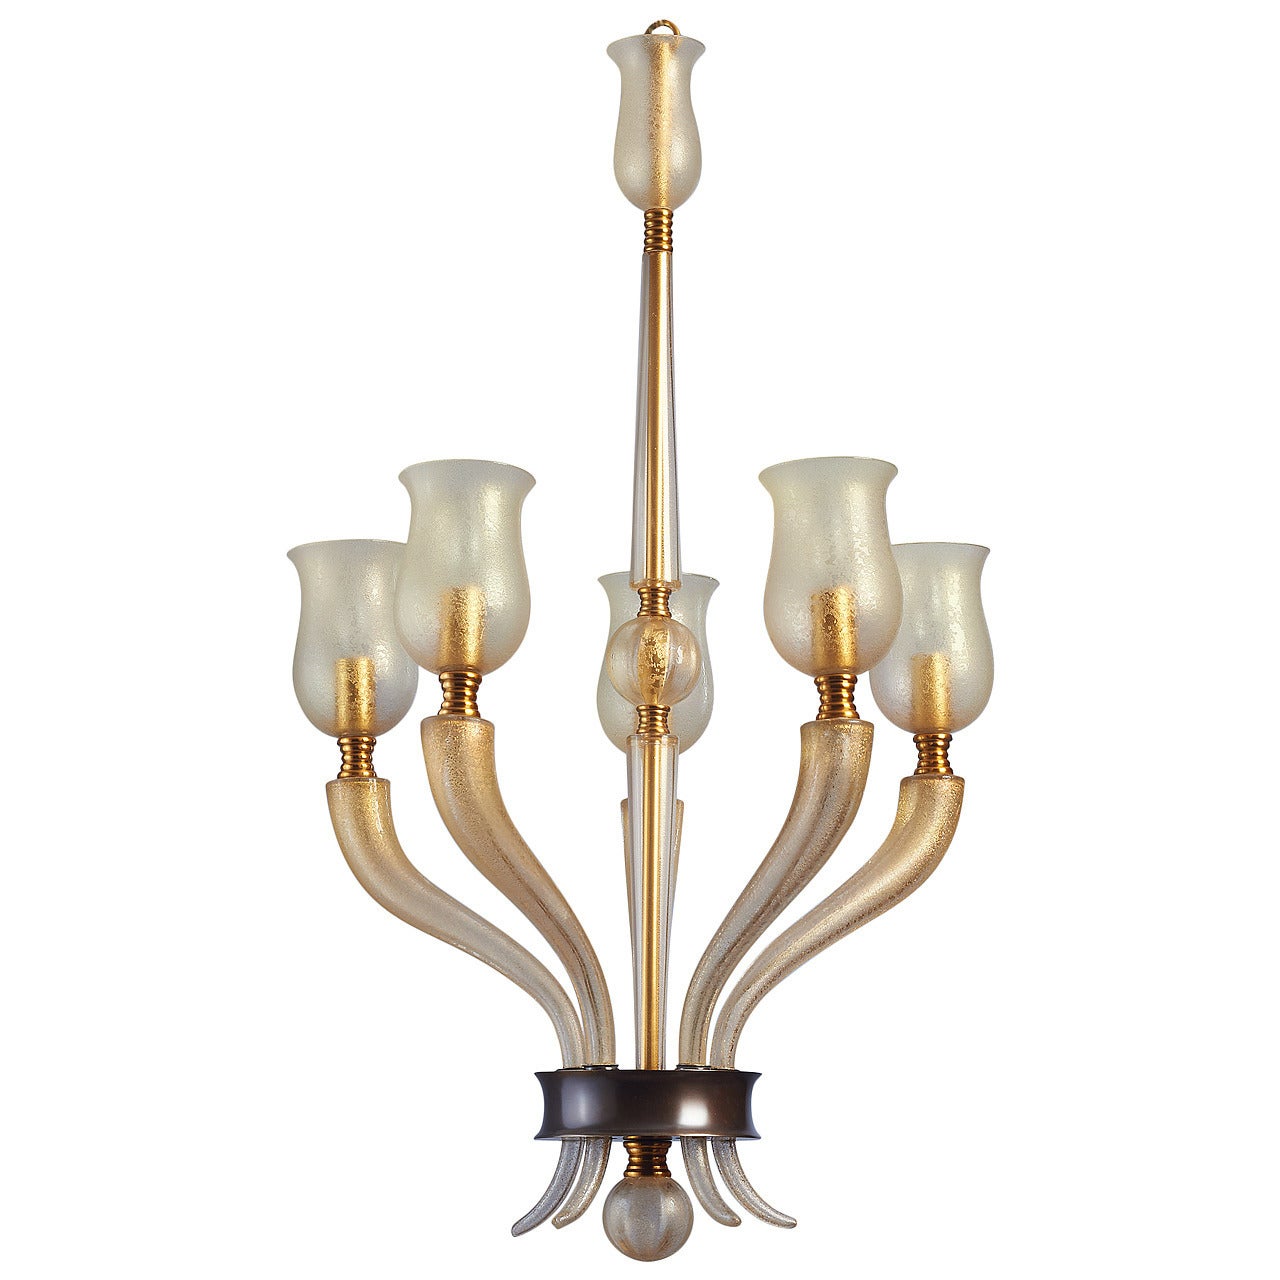 Exceptional Blown Glass Murano Chandelier by Veronese ca. 1950